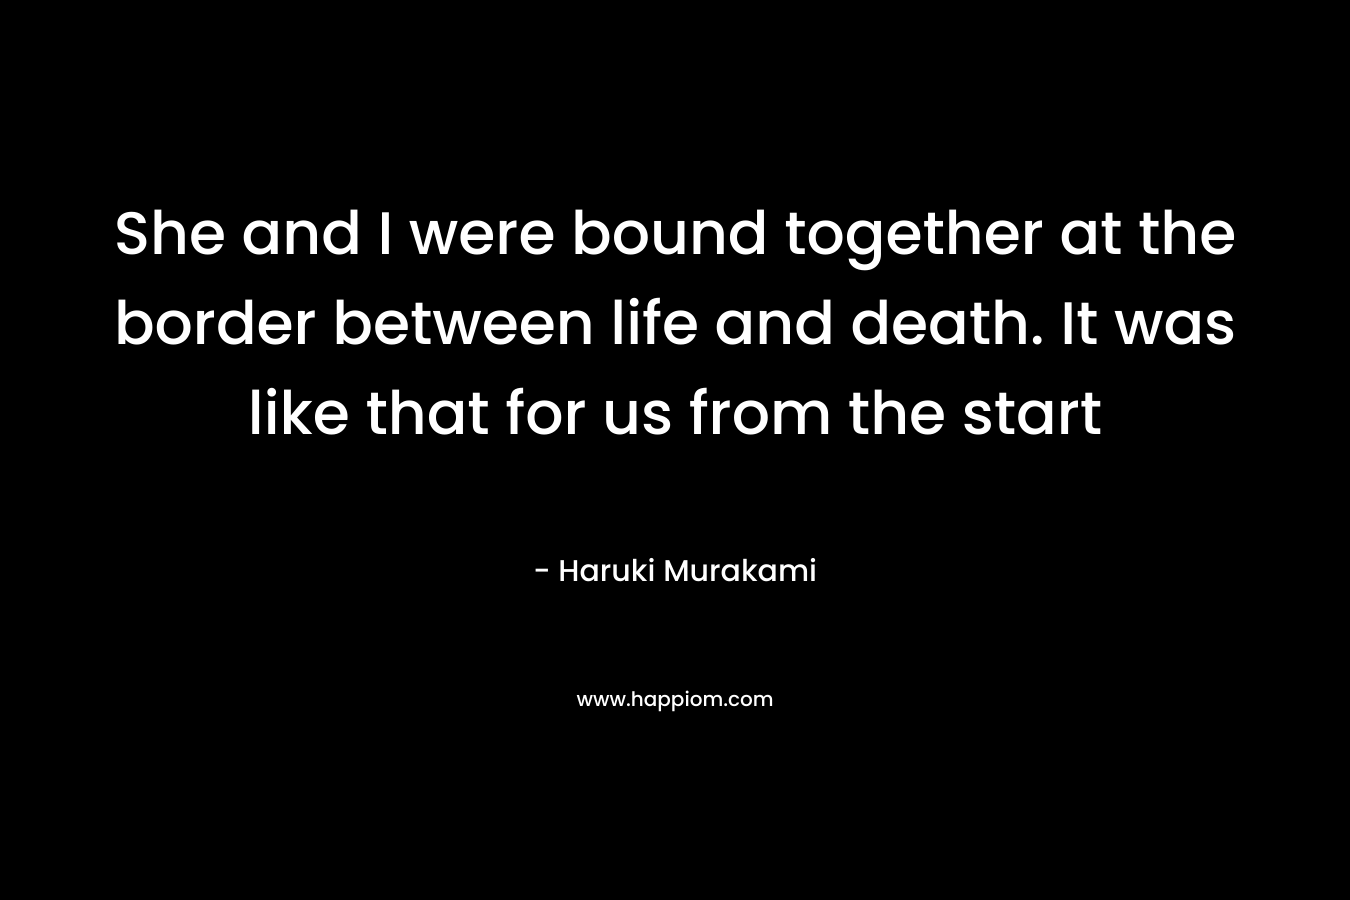 She and I were bound together at the border between life and death. It was like that for us from the start – Haruki Murakami